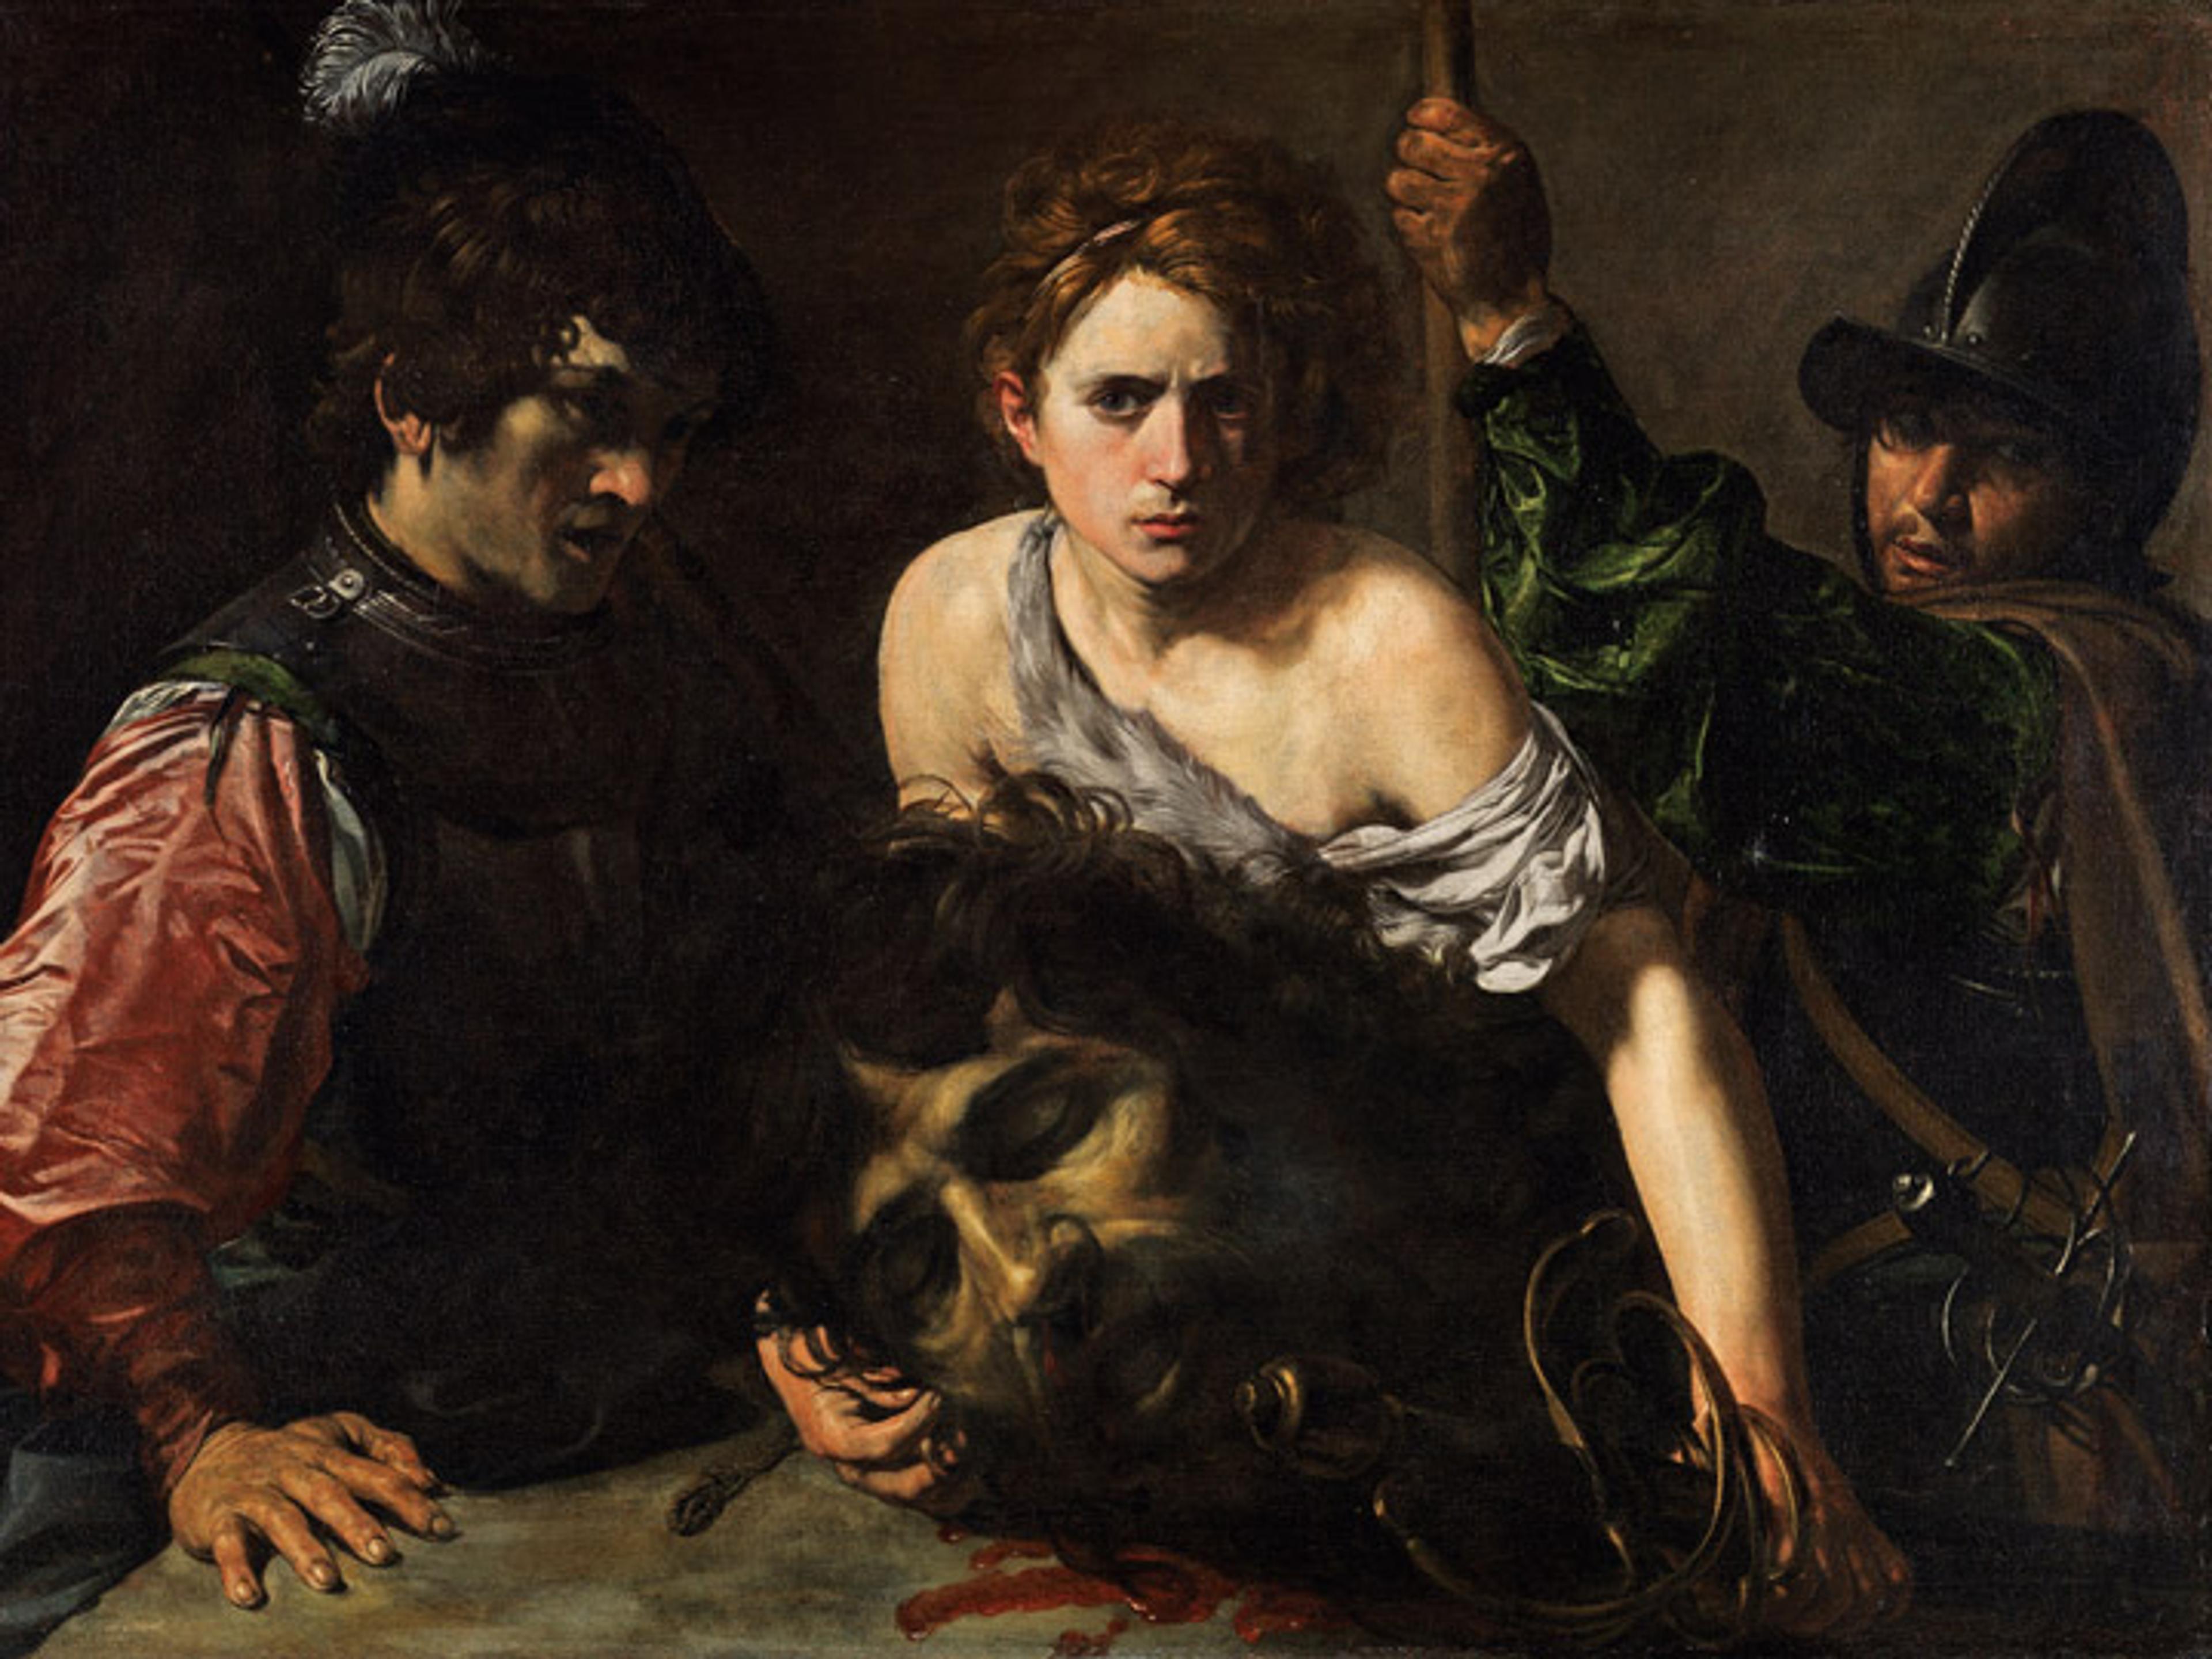 Early 17th-century painting showing David holding the head of Goliath while two soldiers look on